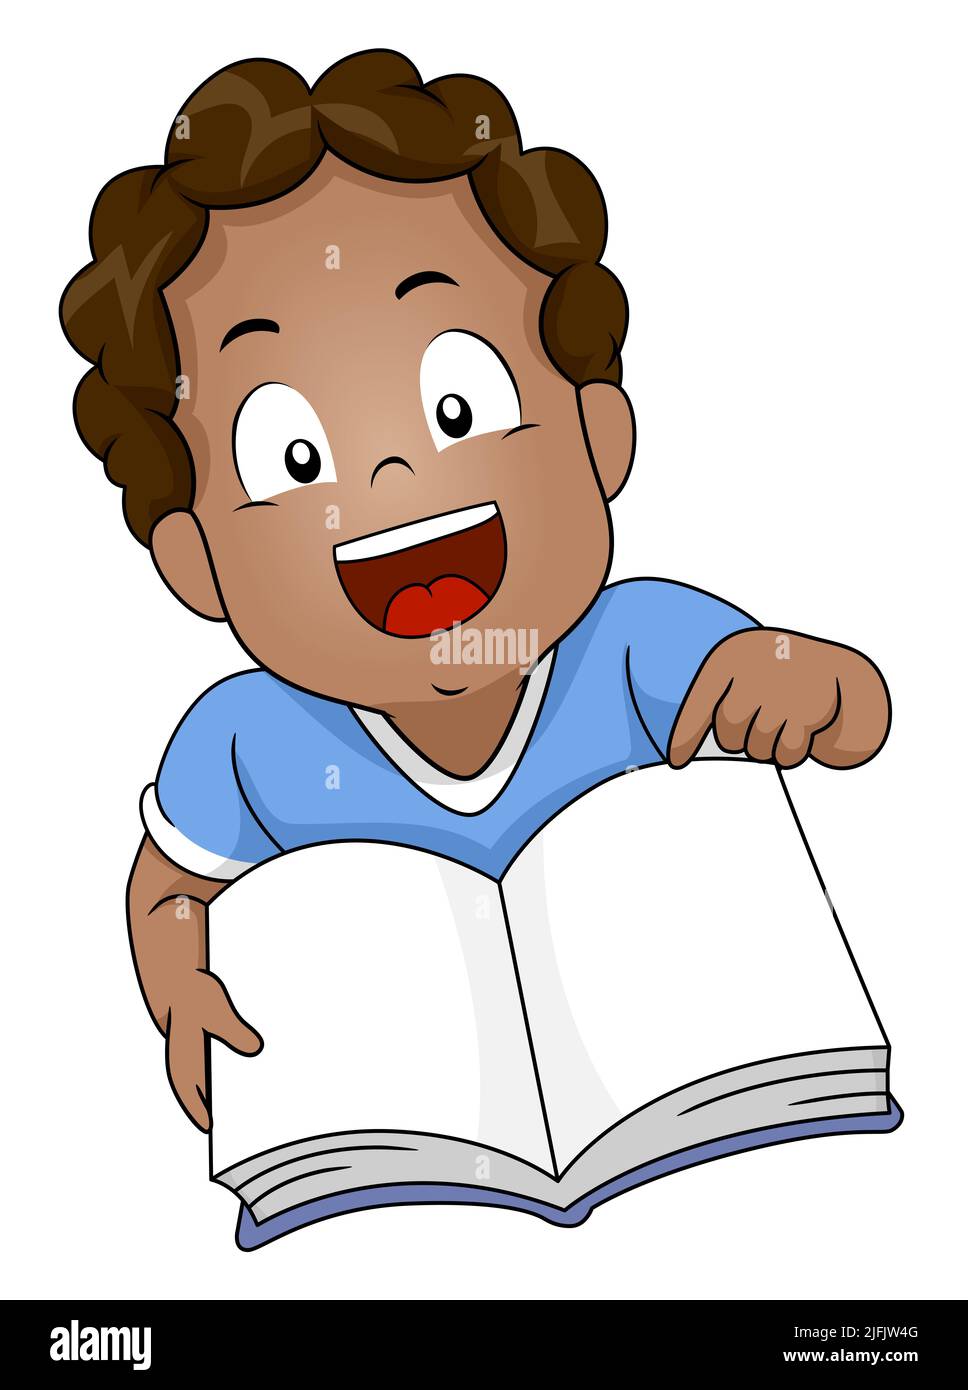 Illustration of African American Kid Boy Student Pointing to an Open Book Stock Photo